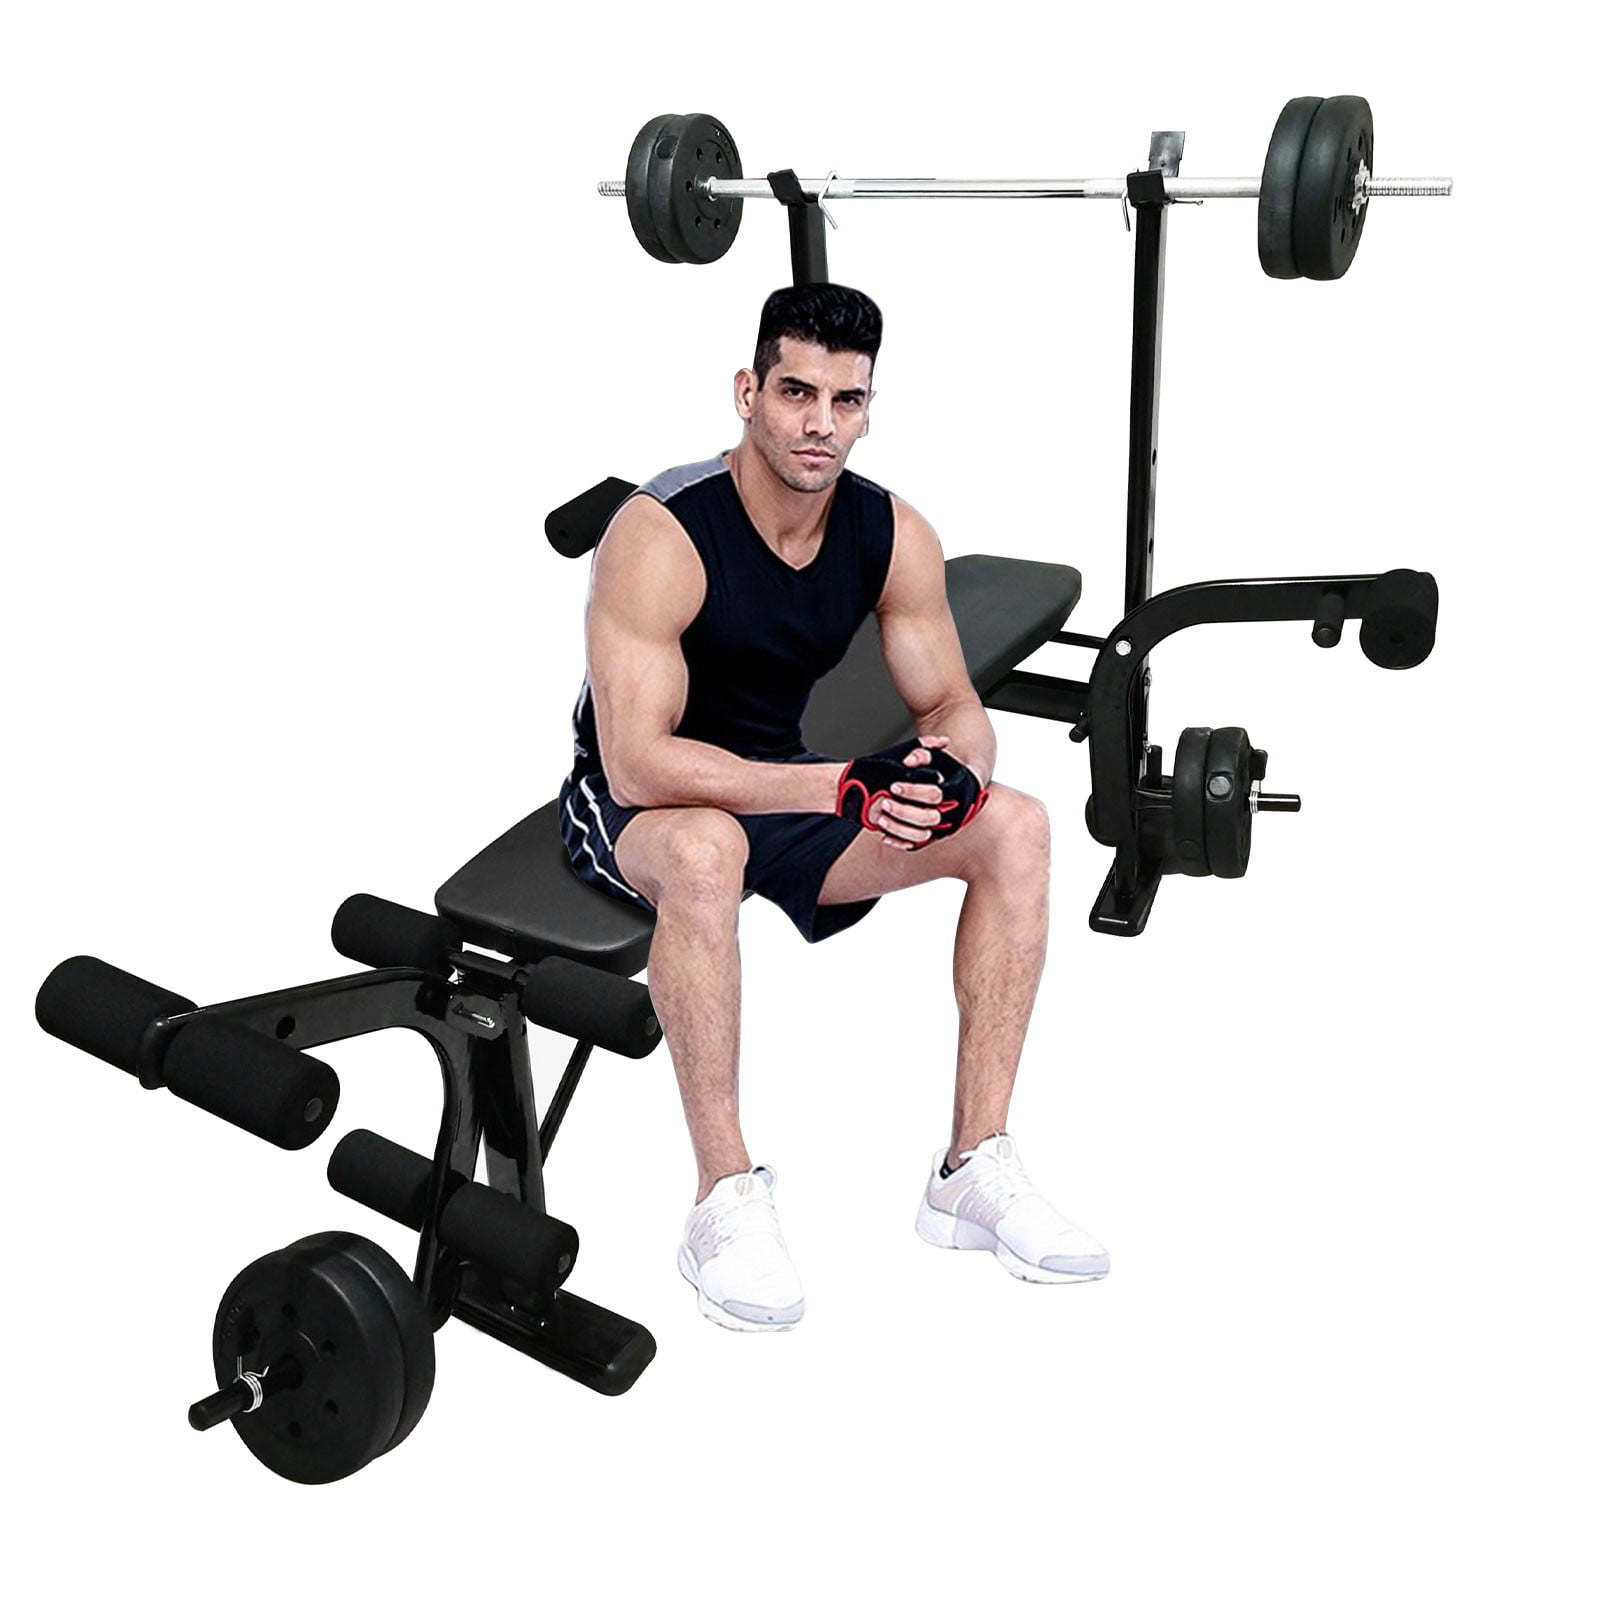 Weight Bench Barbell Lifting Press Gym Equipment Exercise Adjustable Incline 